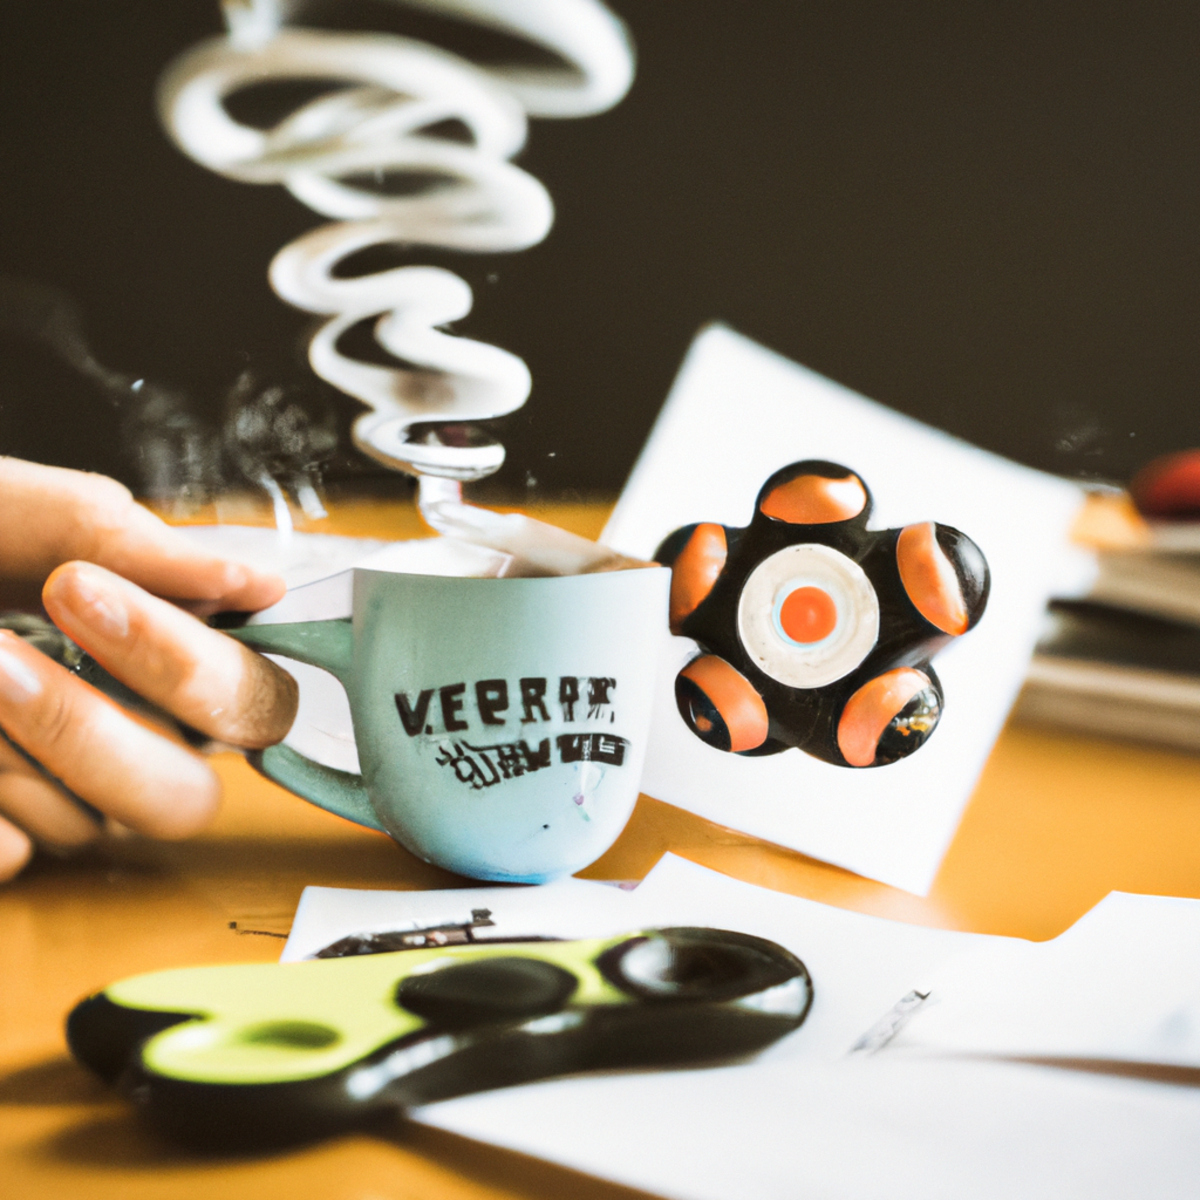 Stress Management In The Workplace - Cluttered desk with coffee, notes, stress ball, fidget spinner, and papers, highlighting high-stress work environment.